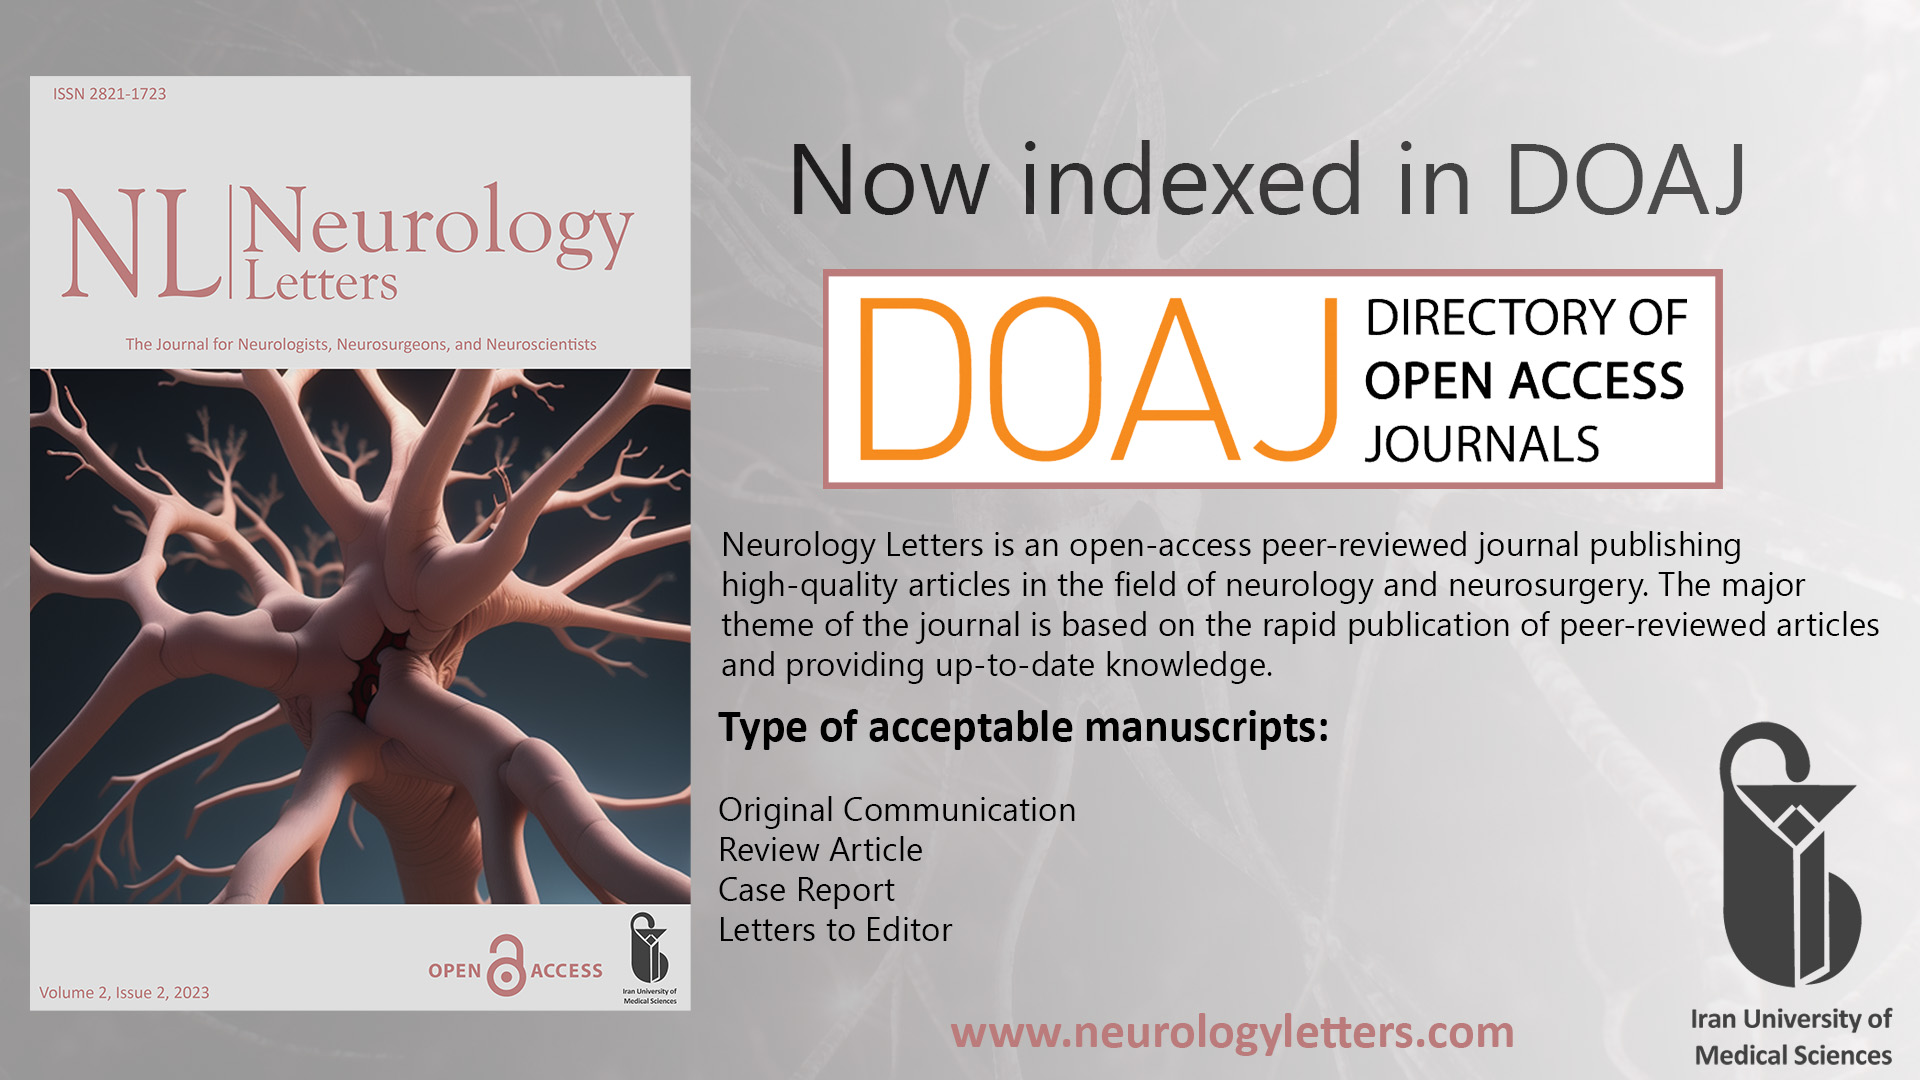 Indexing in the DOAJ (DIRECTORY OF OPEN ACCESS JOURNALS)